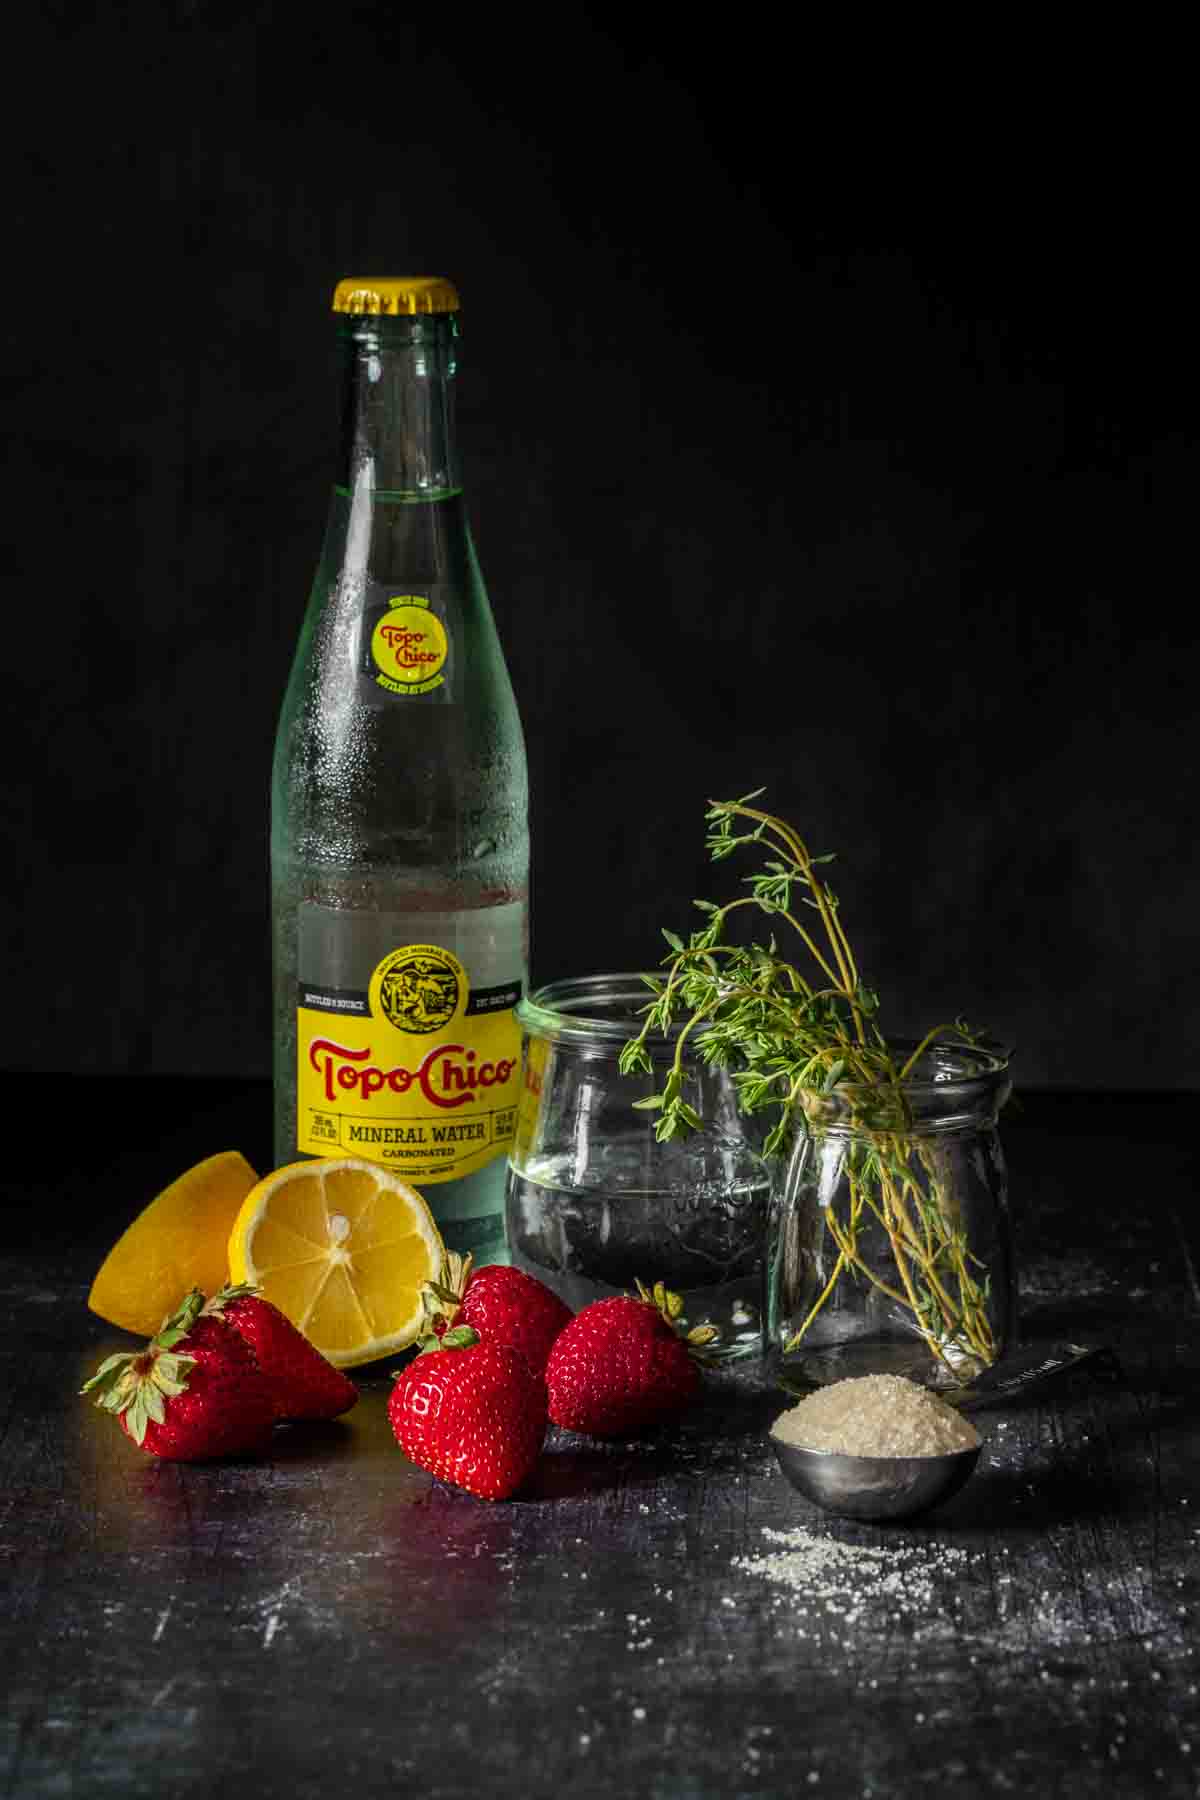 A bottle of Topo Chico next to strawberries, lemon wedges, a clear liquid, thyme and sugar in a spoon.